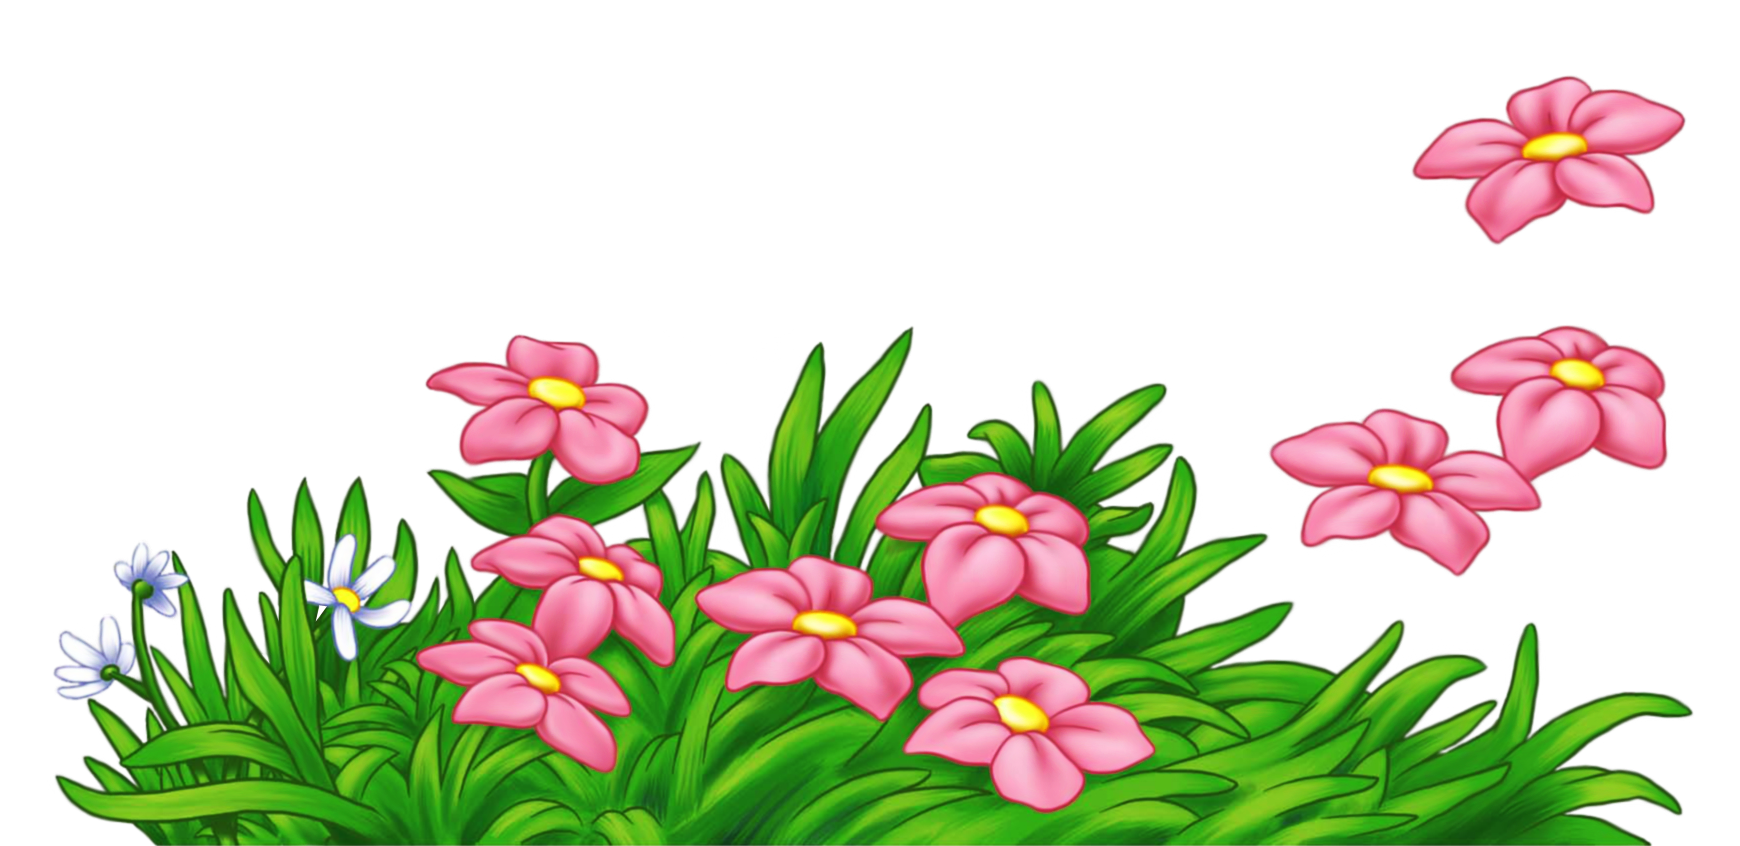 Clipart grass border design. With pink flowers png